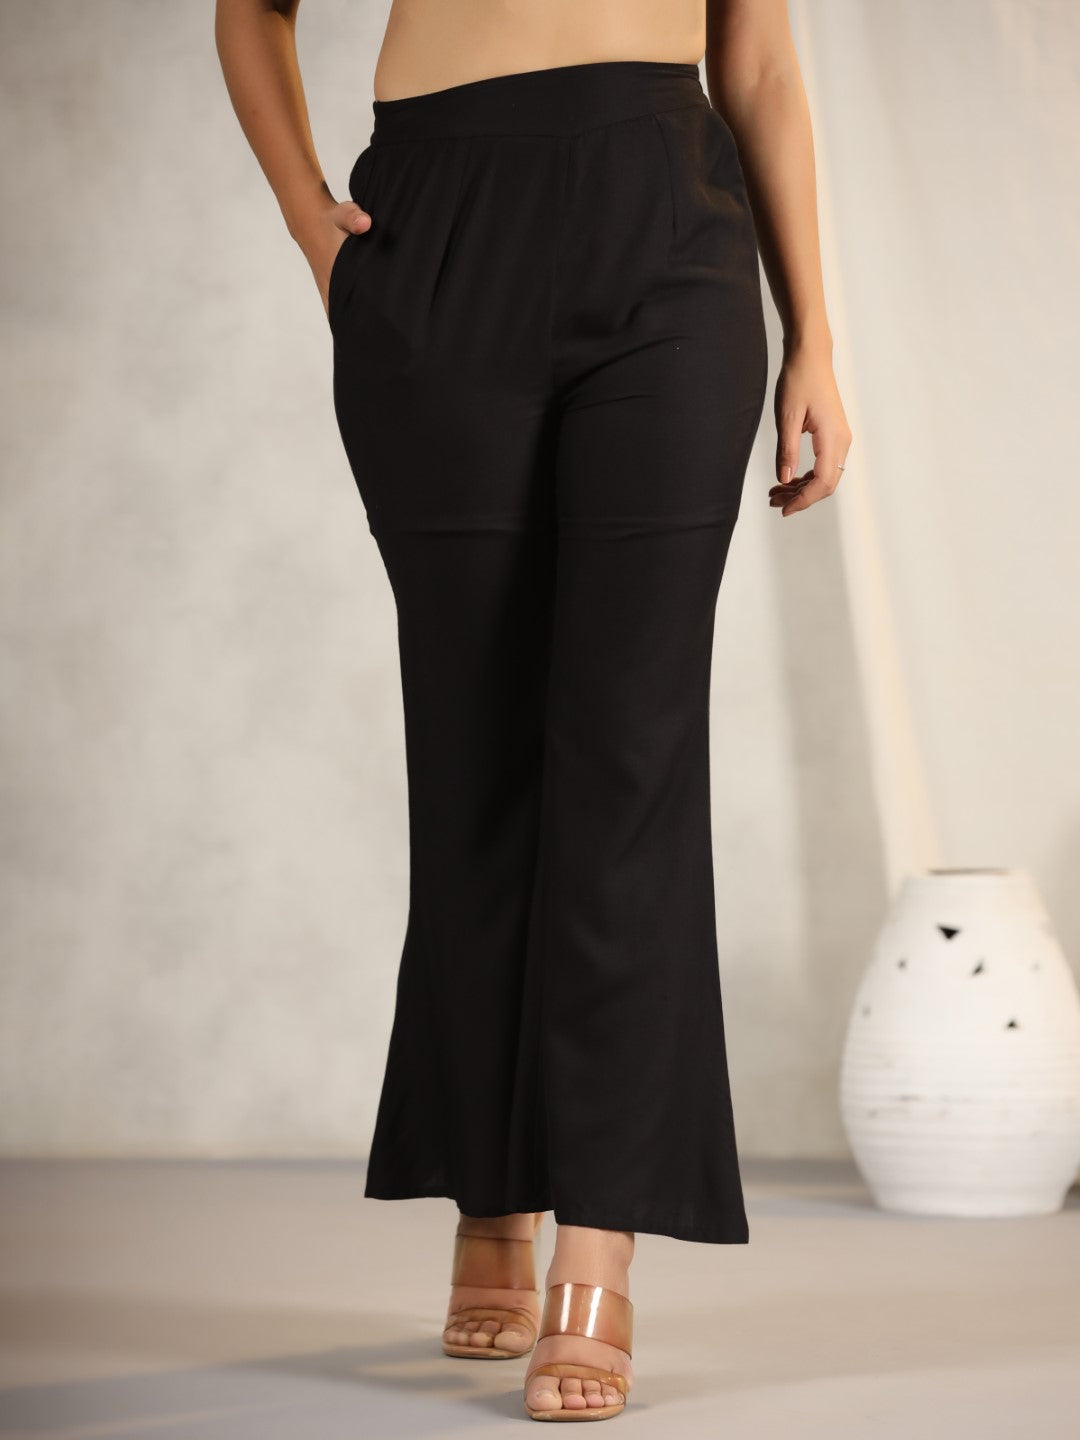 Juniper Black Modal Rayon Women Partially Elasticated Bell Bottom Pants With Single Side Pocket